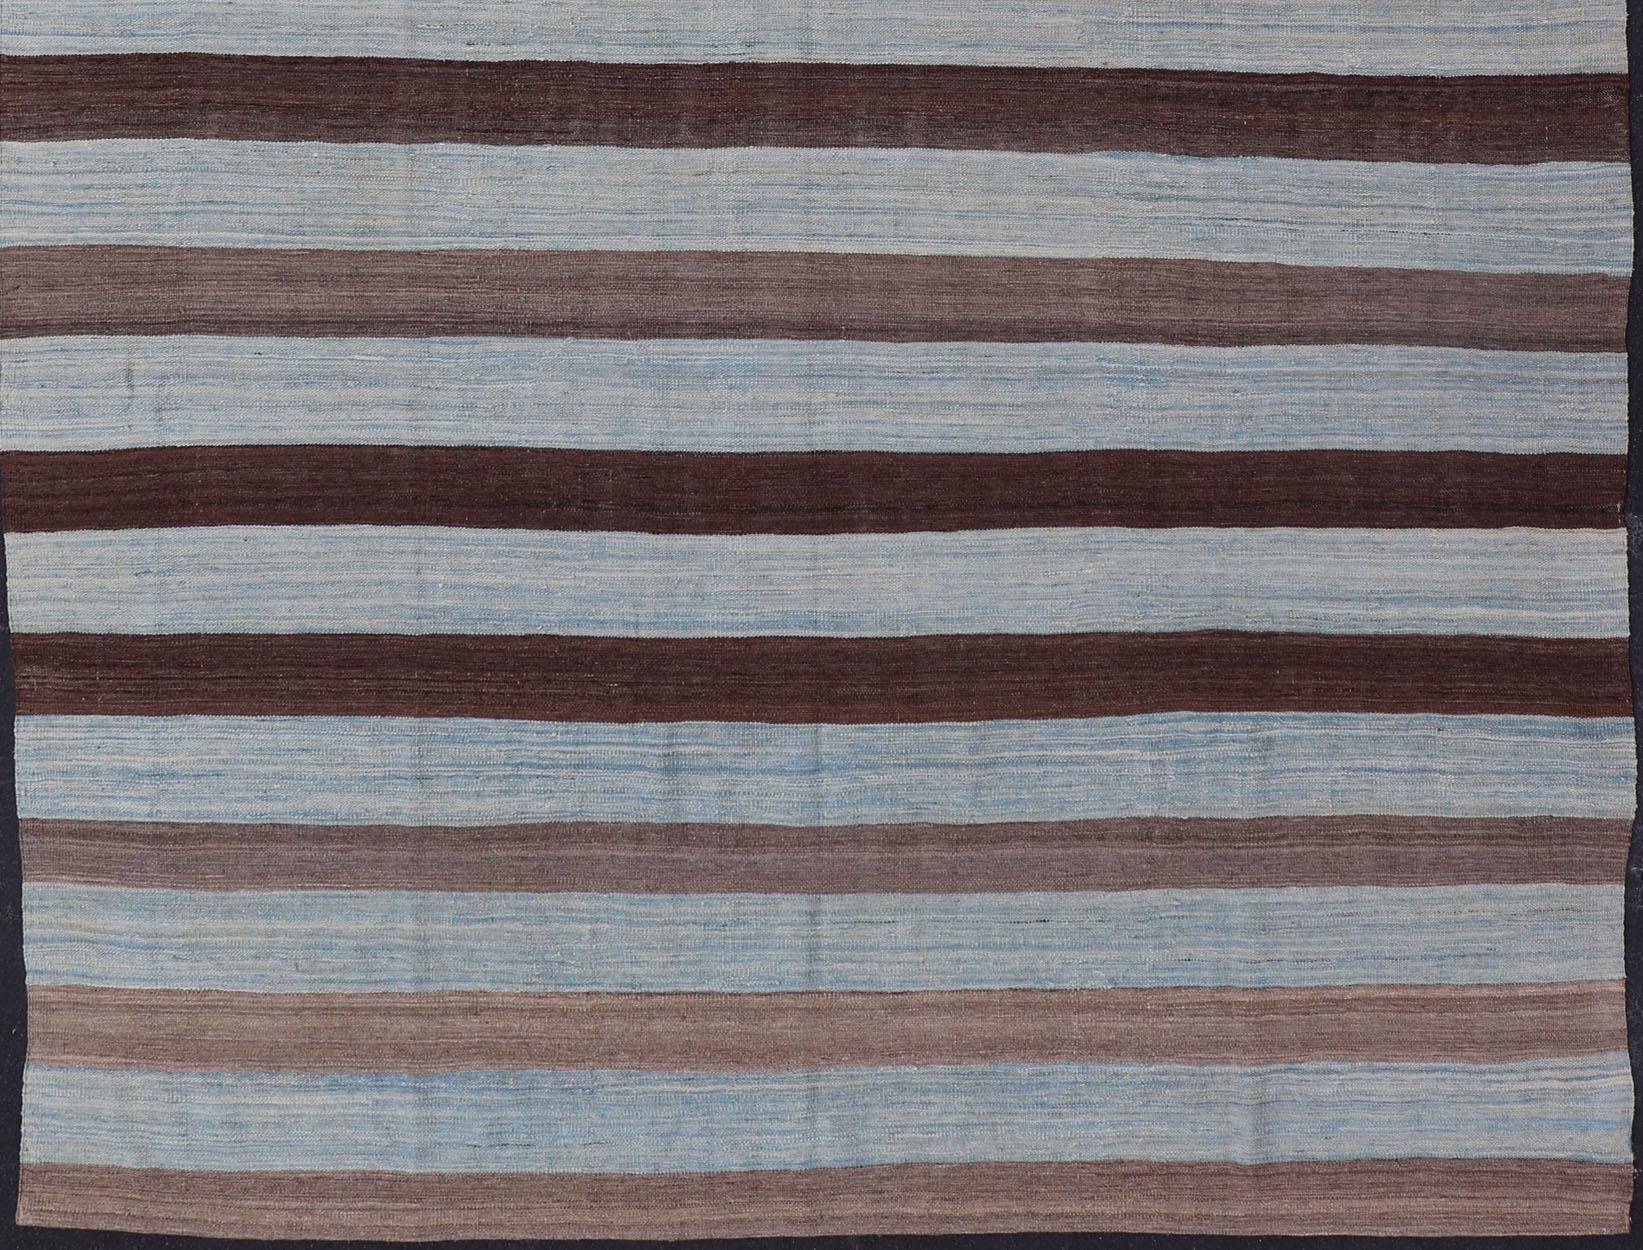 Hand-Woven Modern Kilim Hand Woven Casual Rug with Stripes in Shades of Blue and Brown For Sale